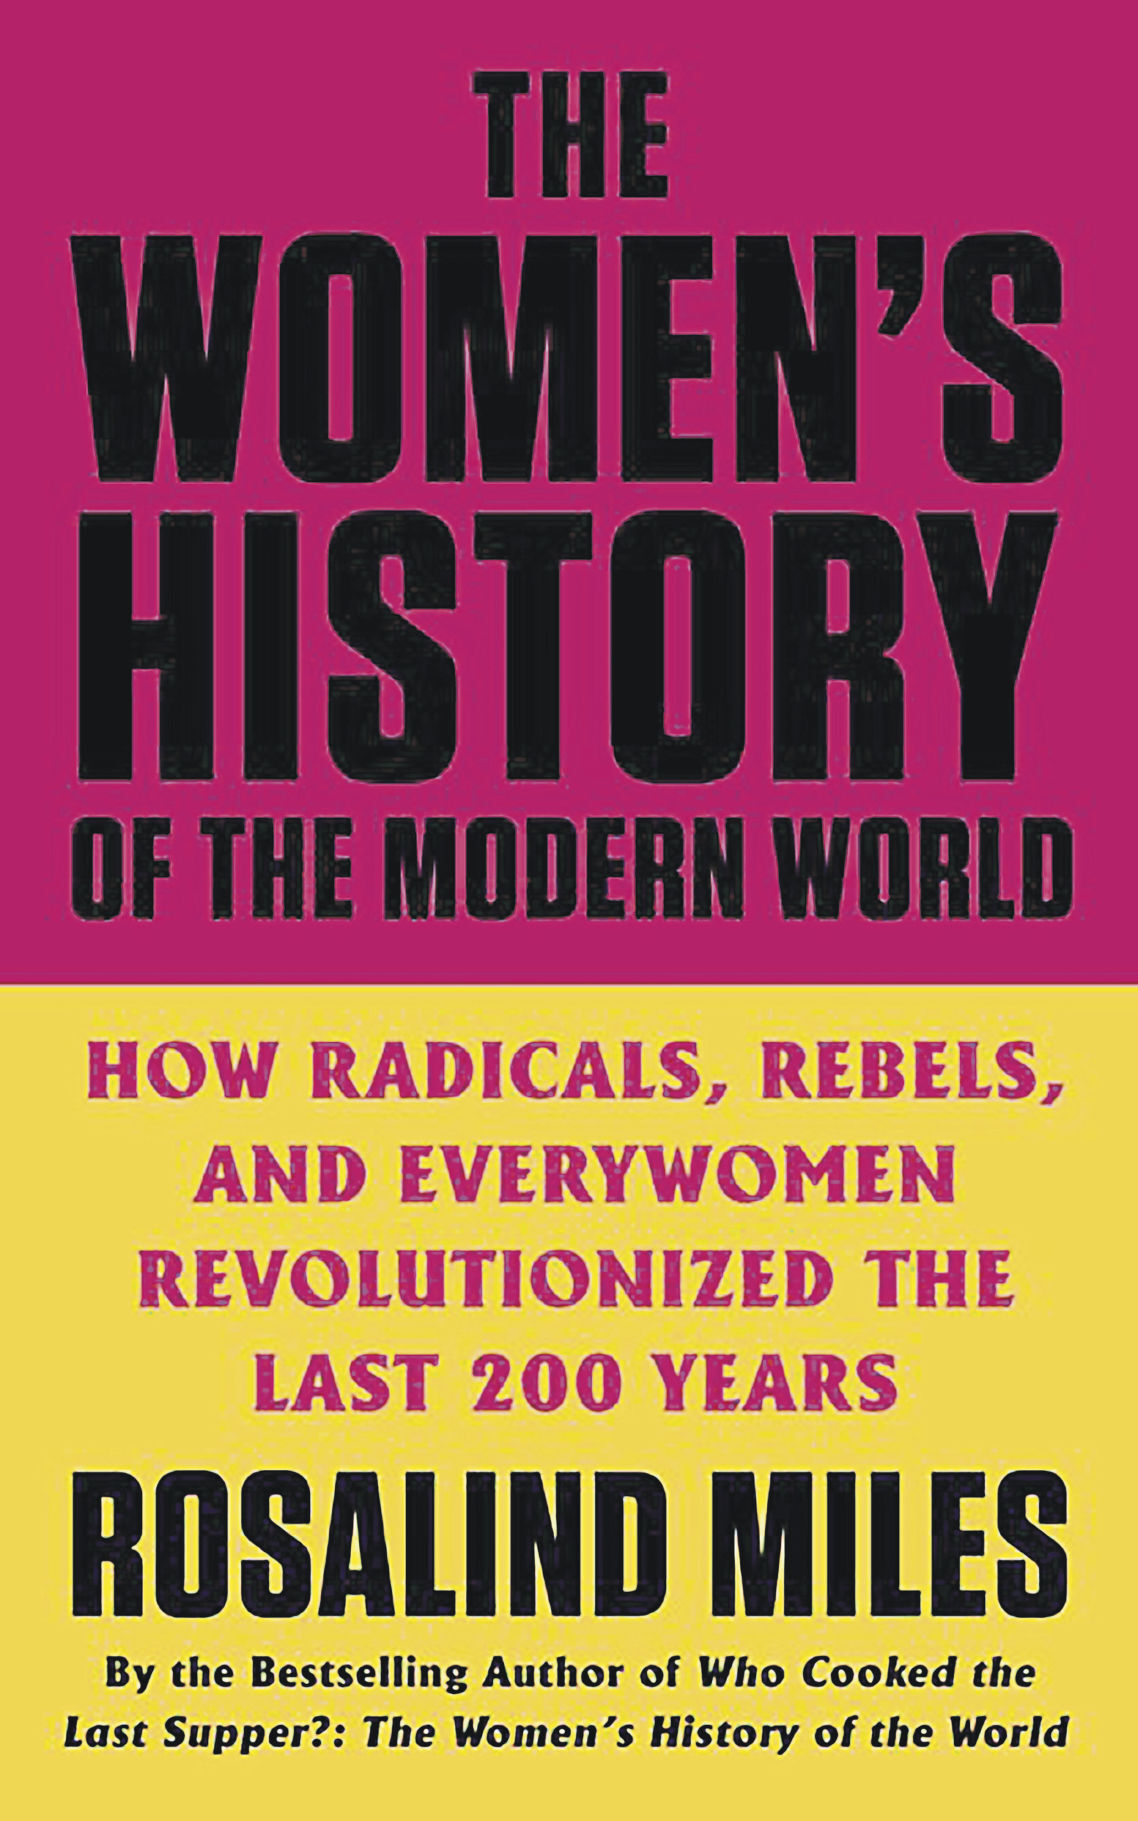 “The Women’s History of the Modern World: How Radicals, Rebels, and Everywomen Revolutionized the Last 200 Years,” by Rosalind Miles.    PHOTO CREDIT: Tribune News Service